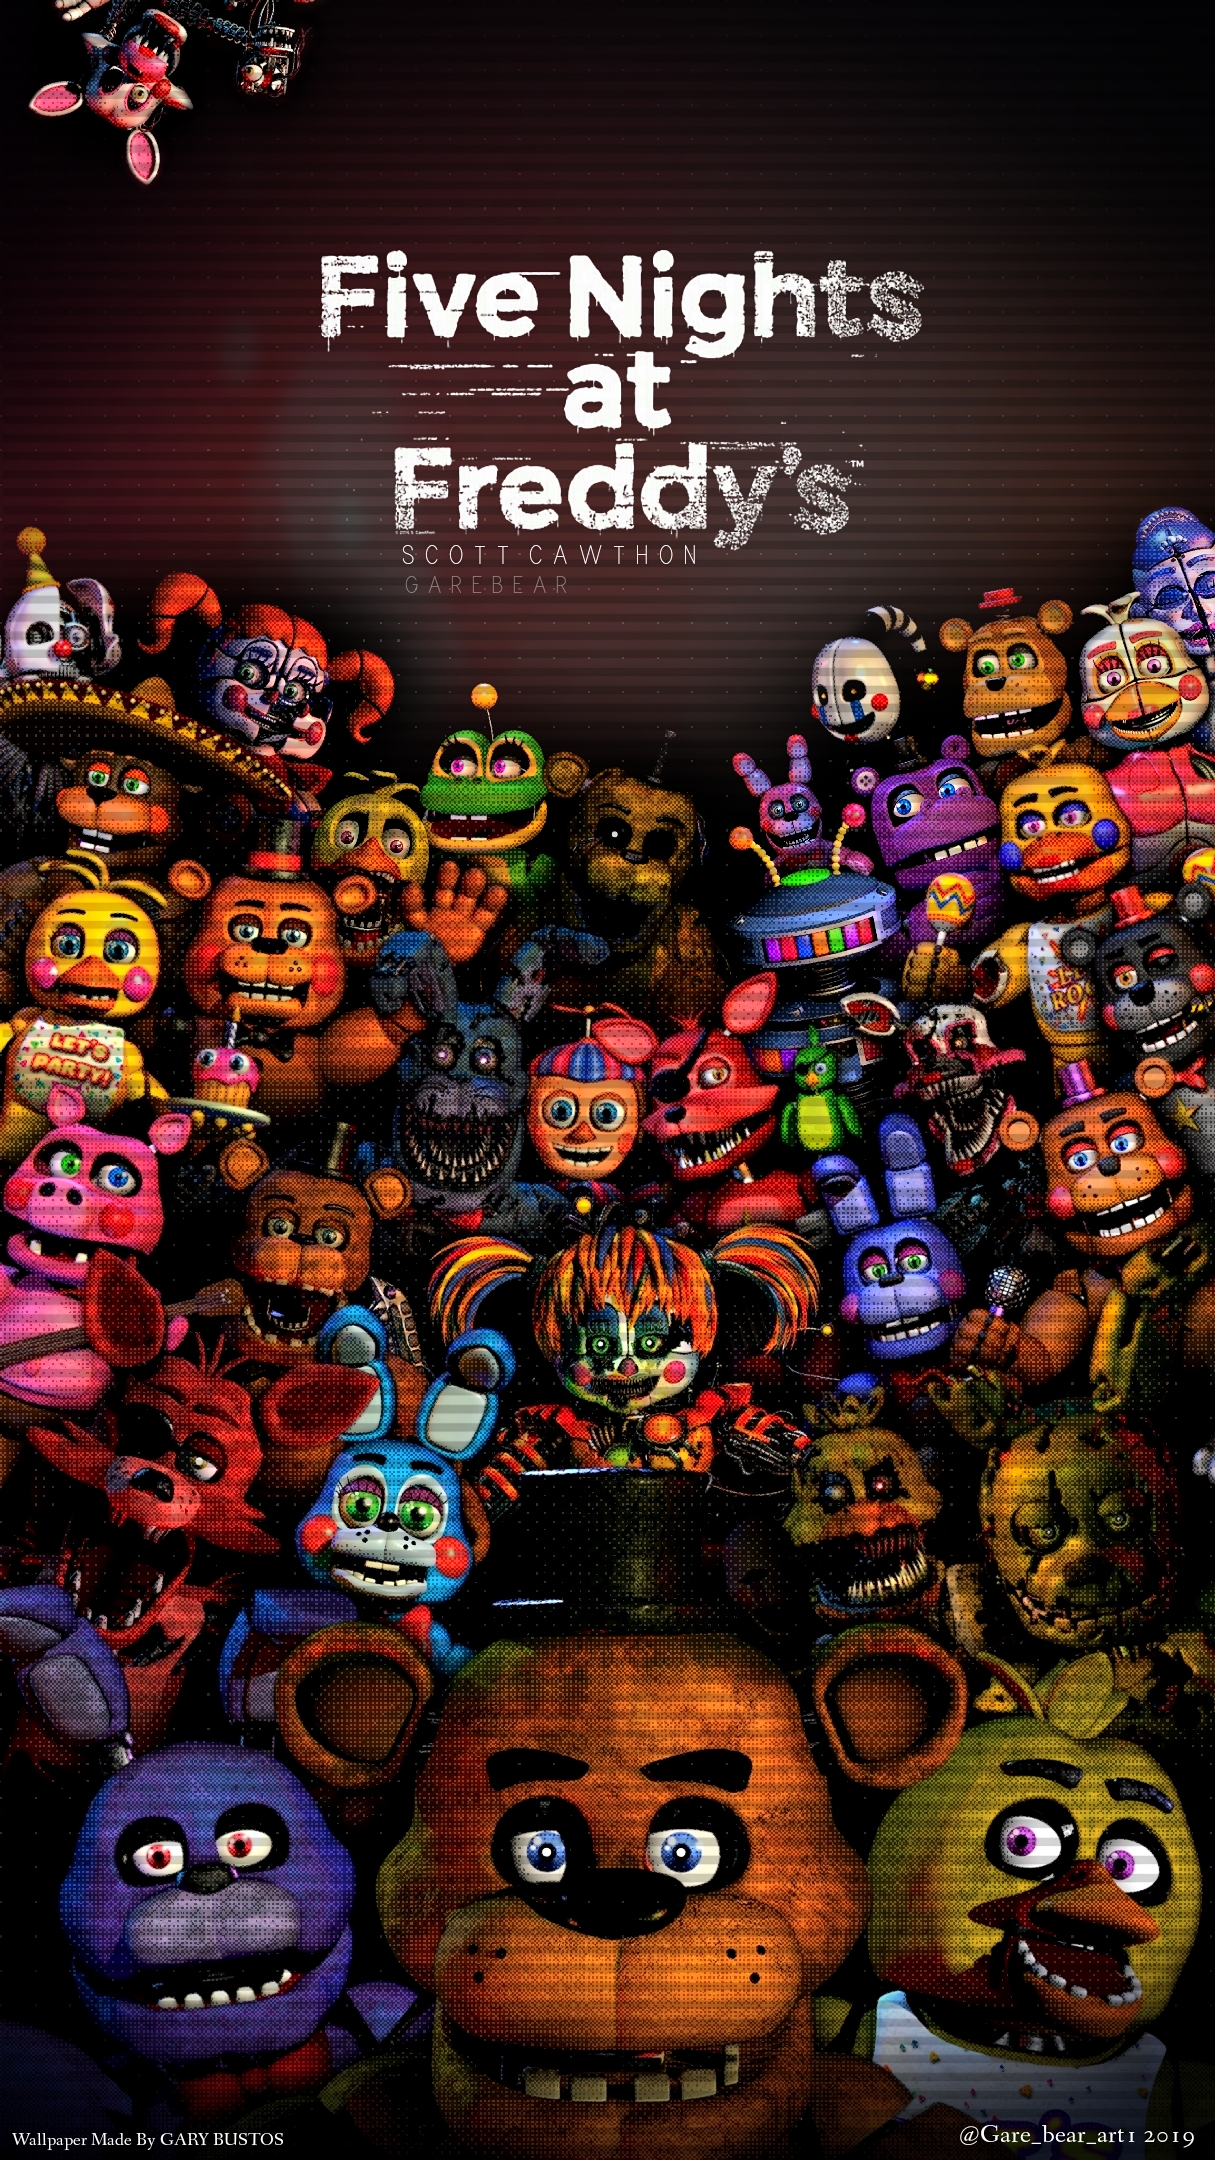 Five Nights At Freddy's Characters by GareBearArt1 on DeviantArt